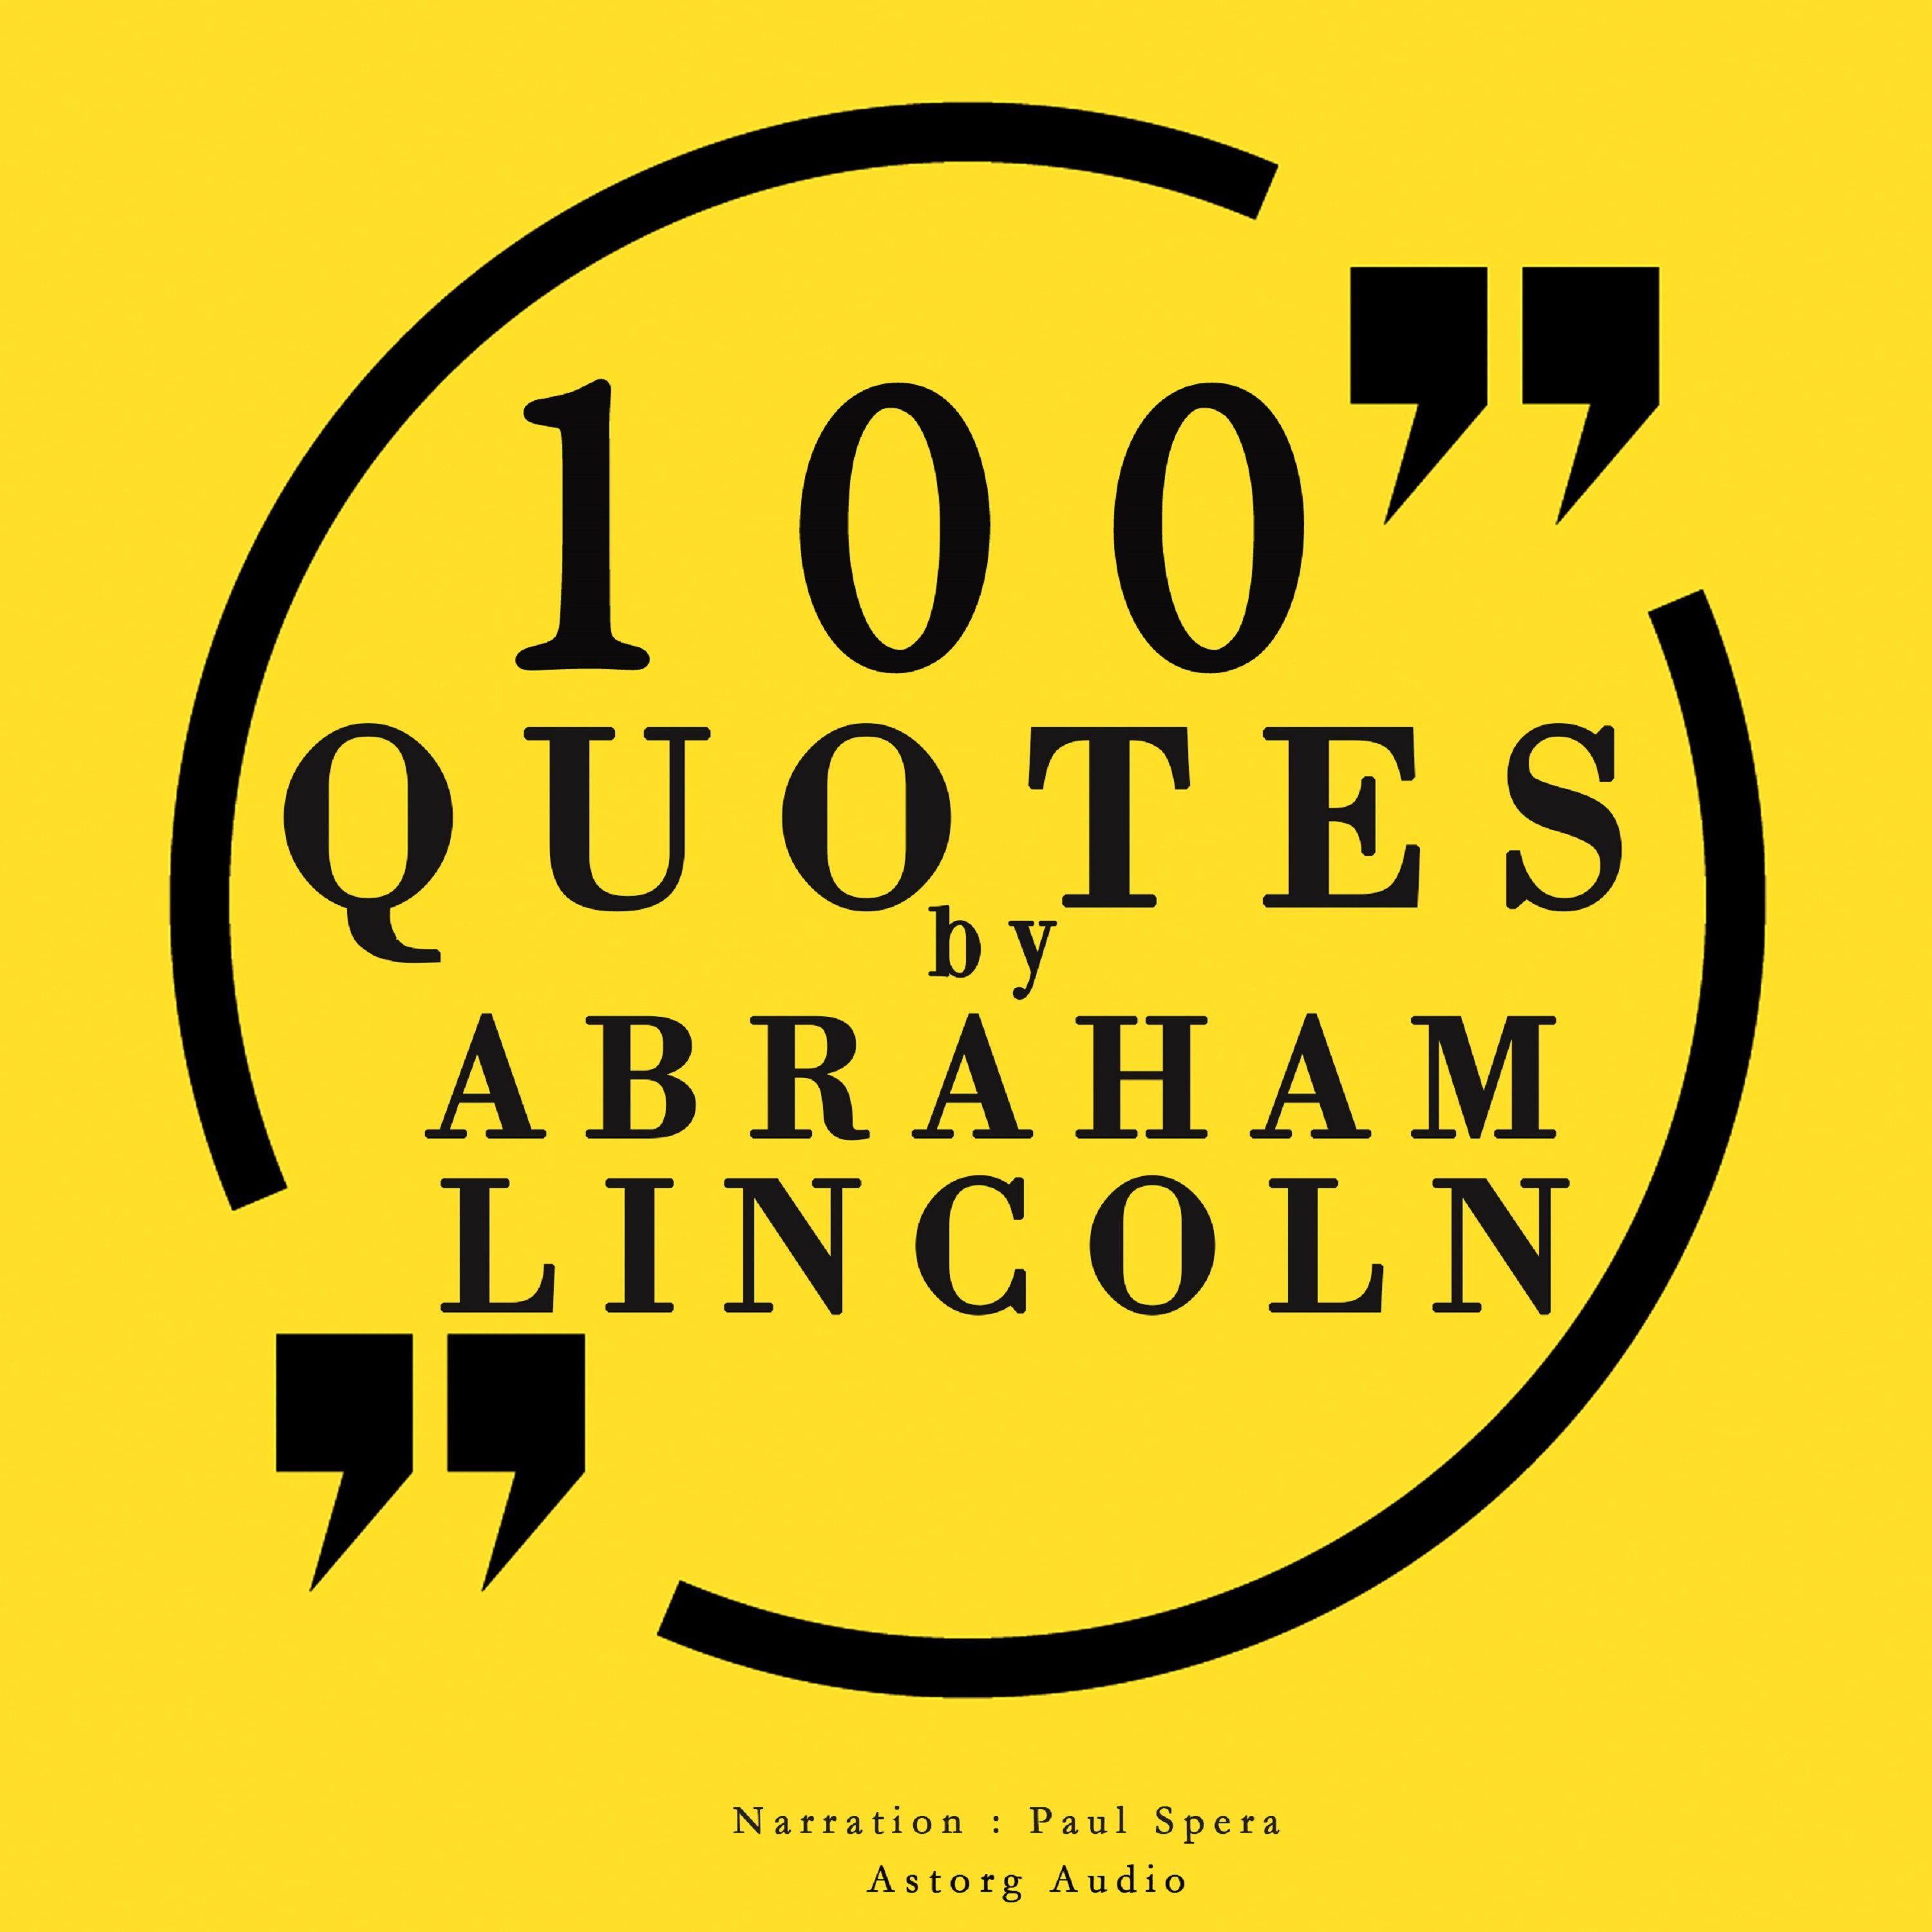 100 Quotes by Abraham Lincoln, audiobook by Abraham Lincoln